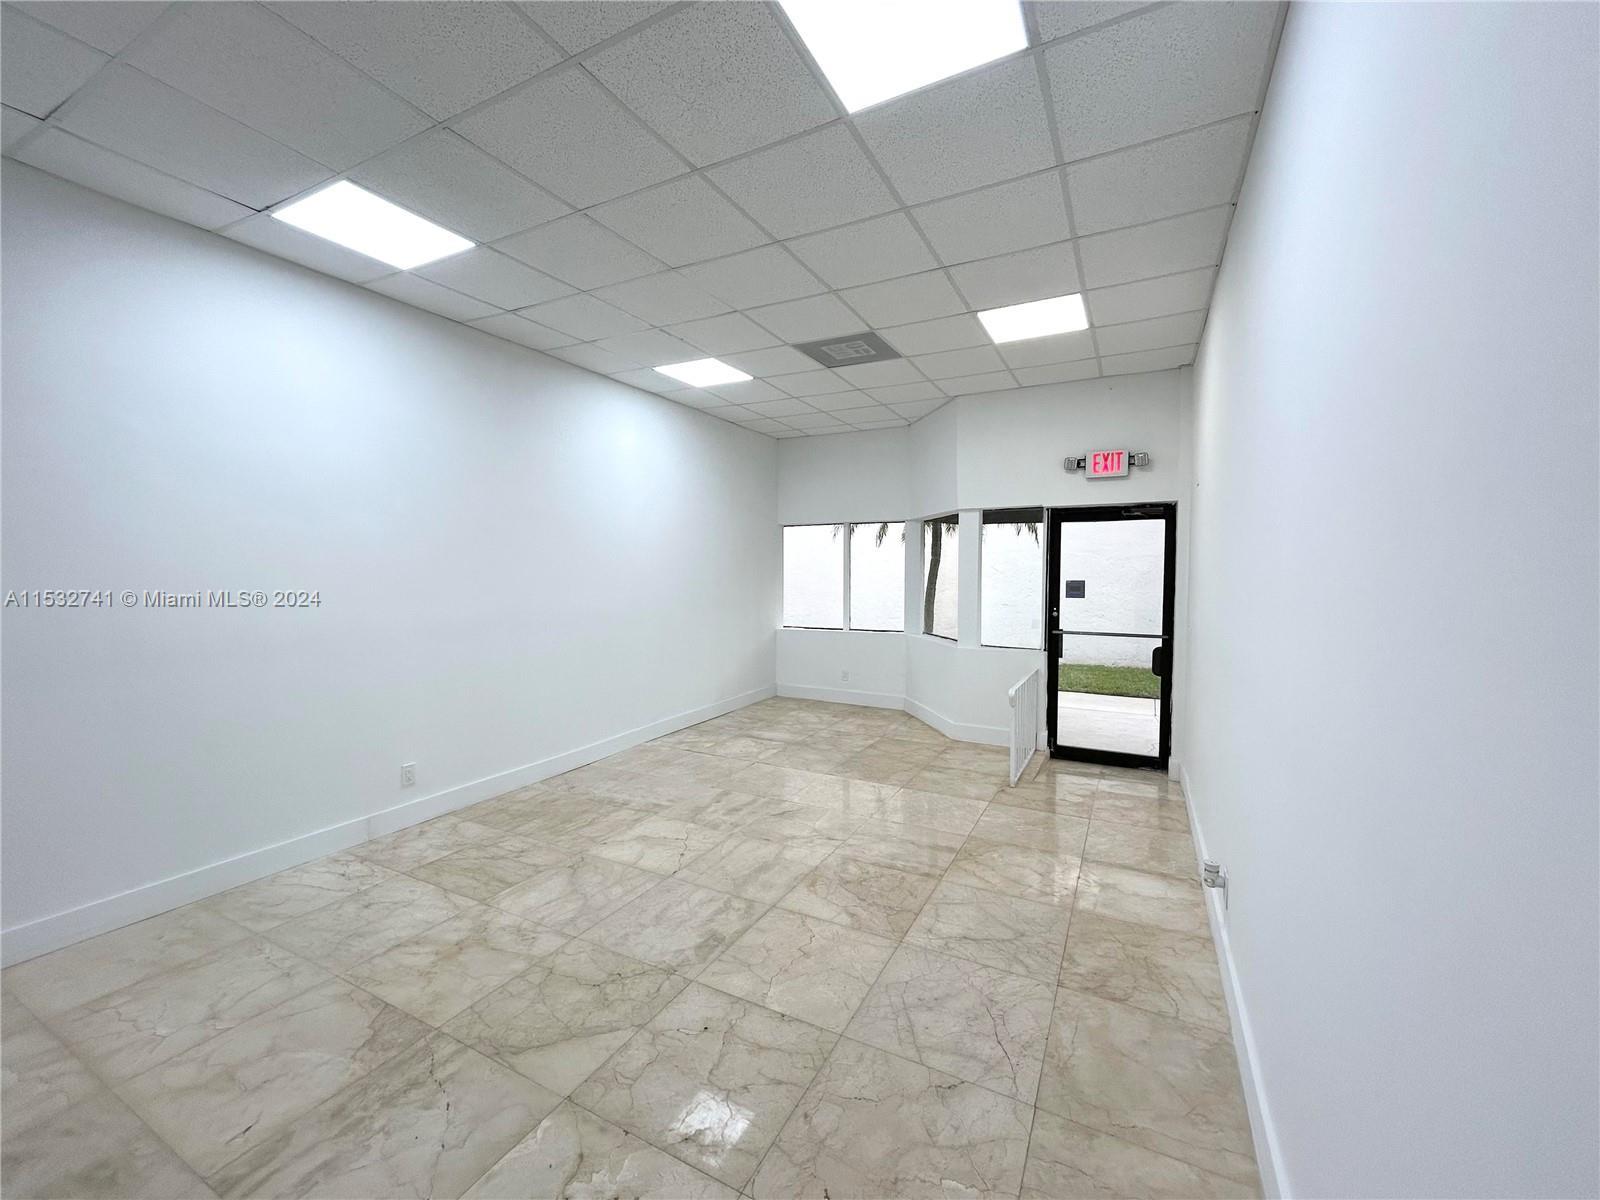 Photo of 4815 NW 79th Ave #15 in Doral, FL